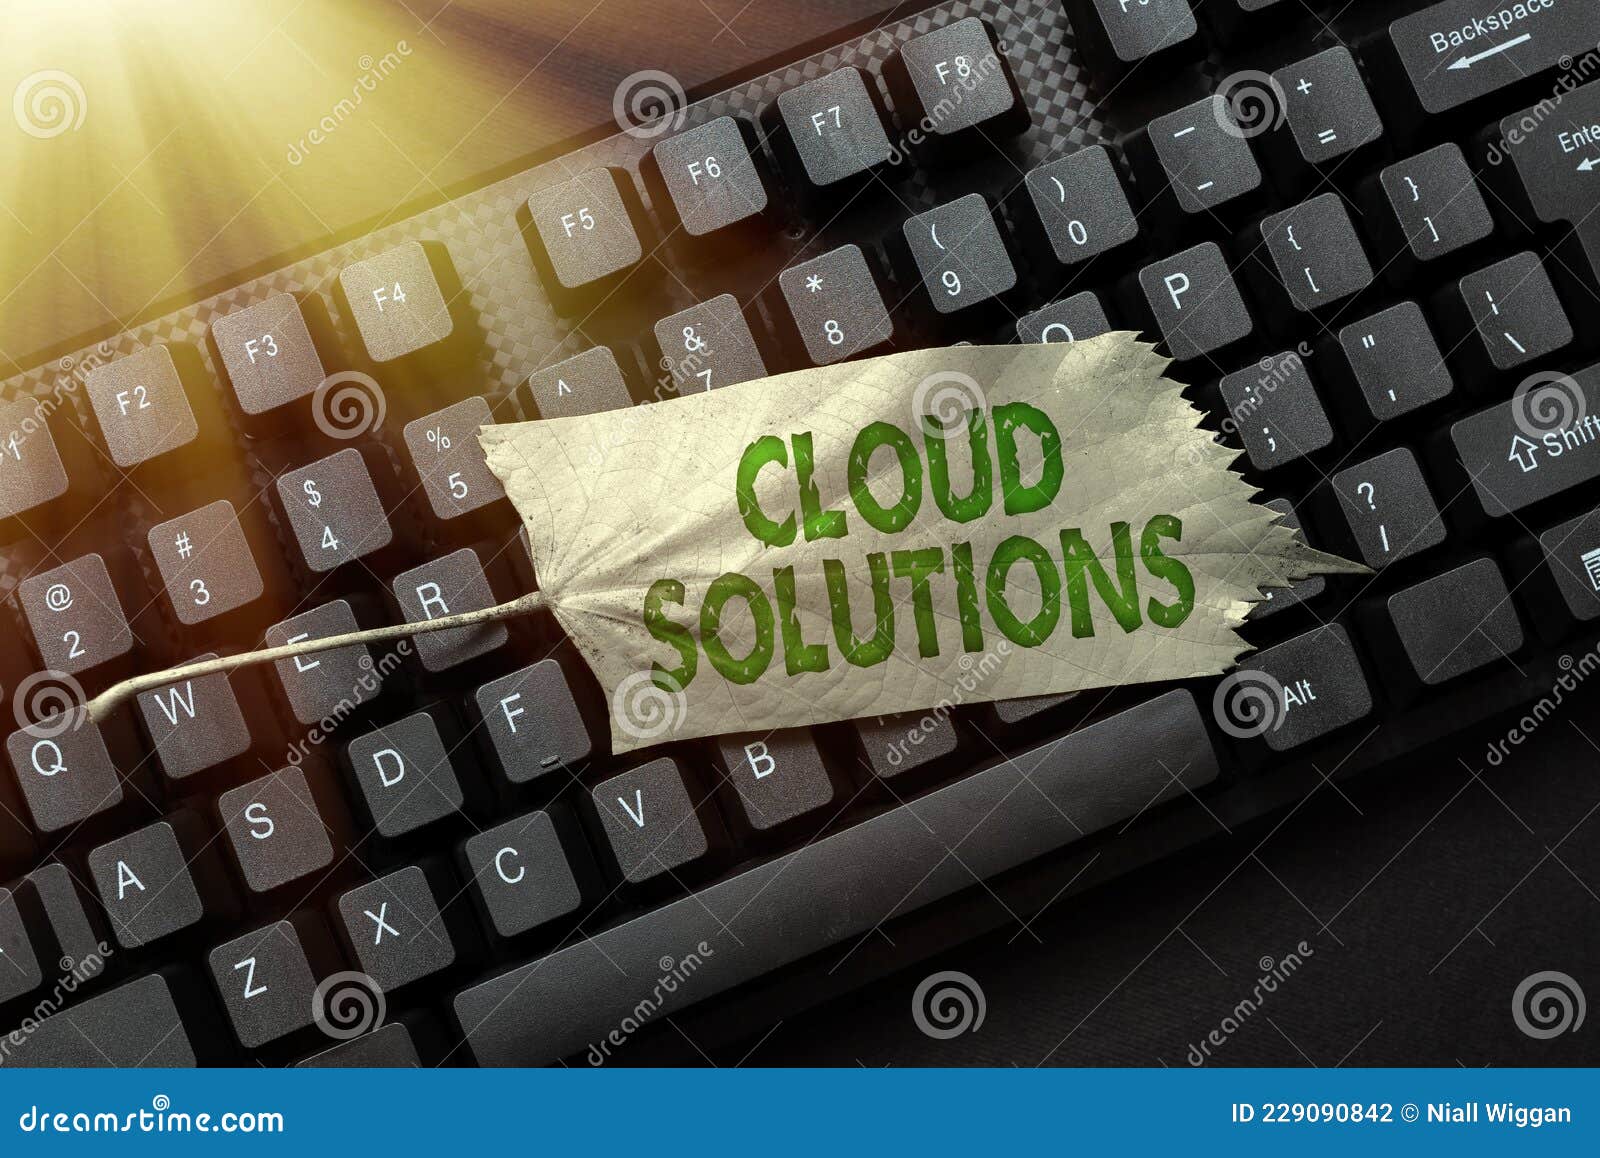 inspiration showing sign cloud solutions. business idea ondemand services or resources accessed via the internet